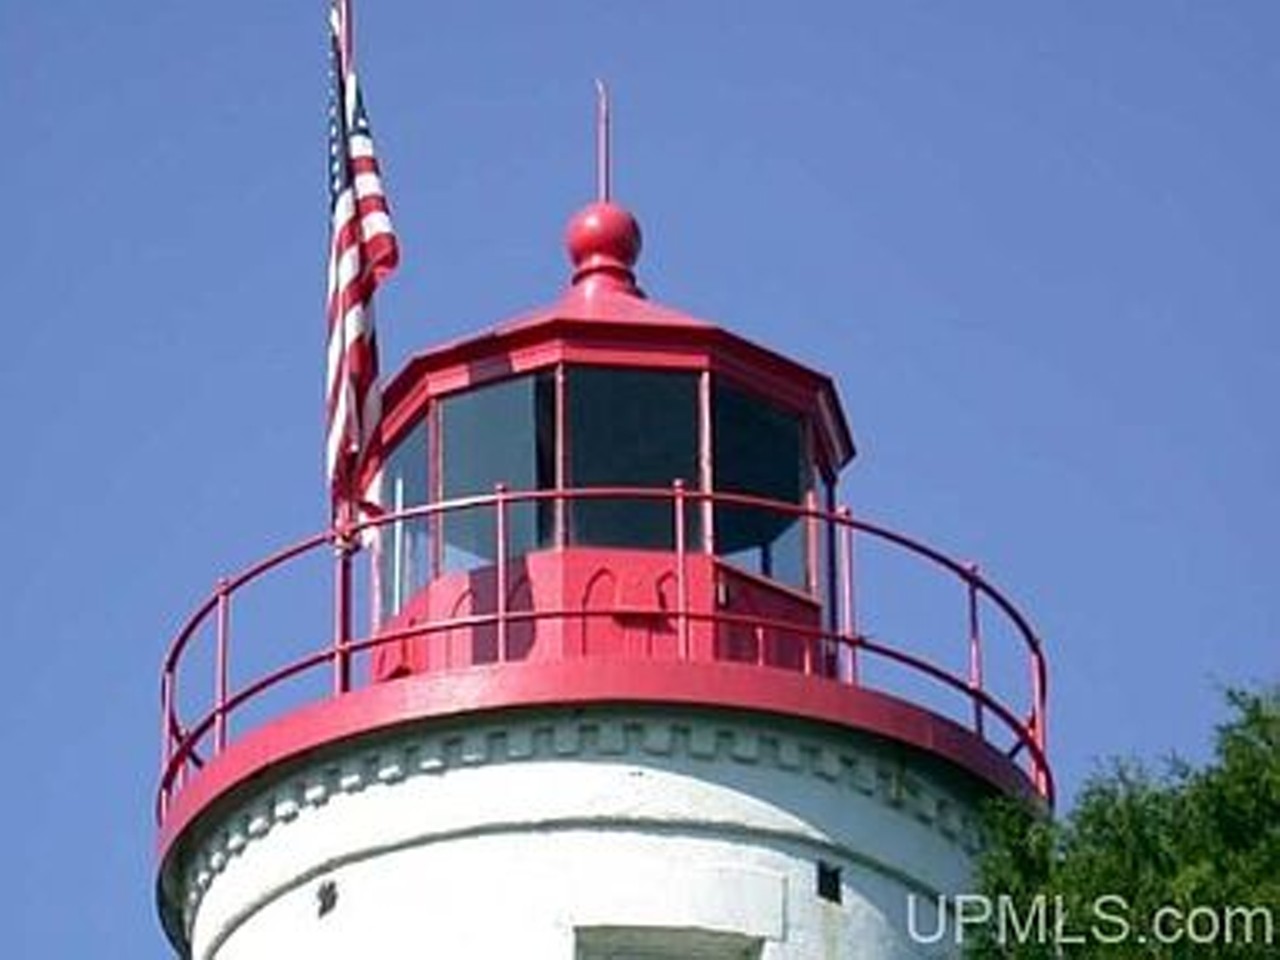 You can actually purchase a renovated 19th-century lighthouse on Lake Superior